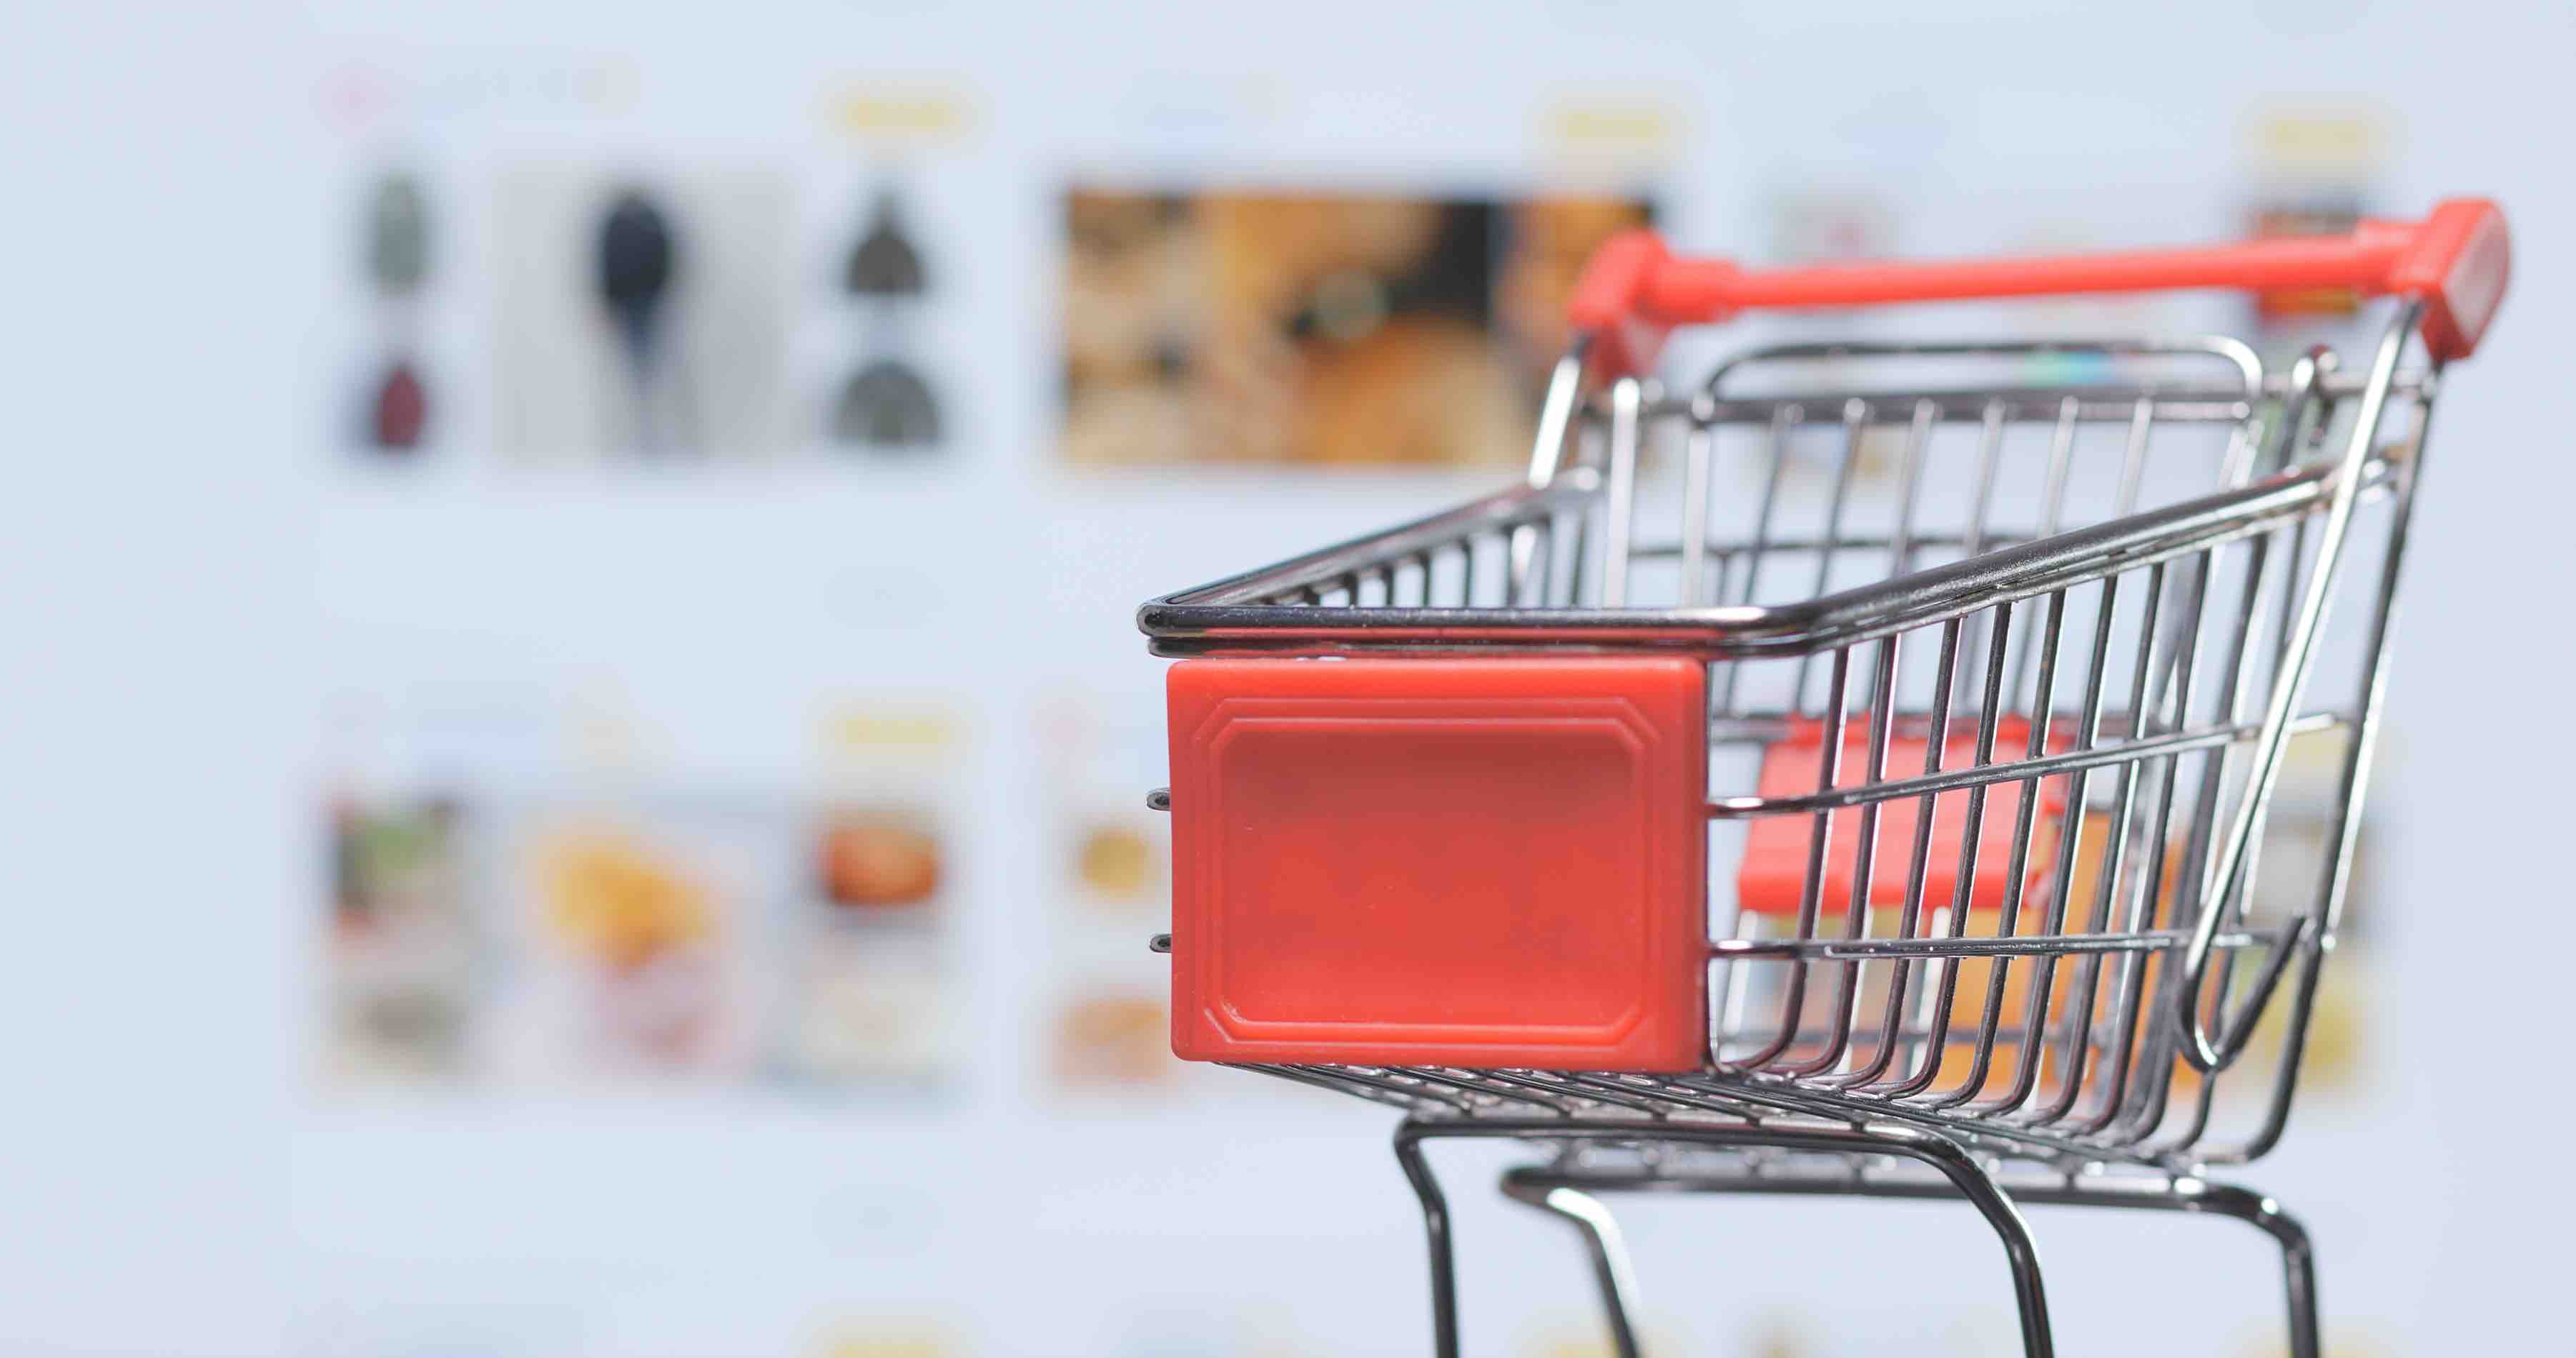 cart abandonment, online shopping cart, small business, small business owners, grow onkline store, stop cart abandonment, holidays 2020, marketing tips, business tips